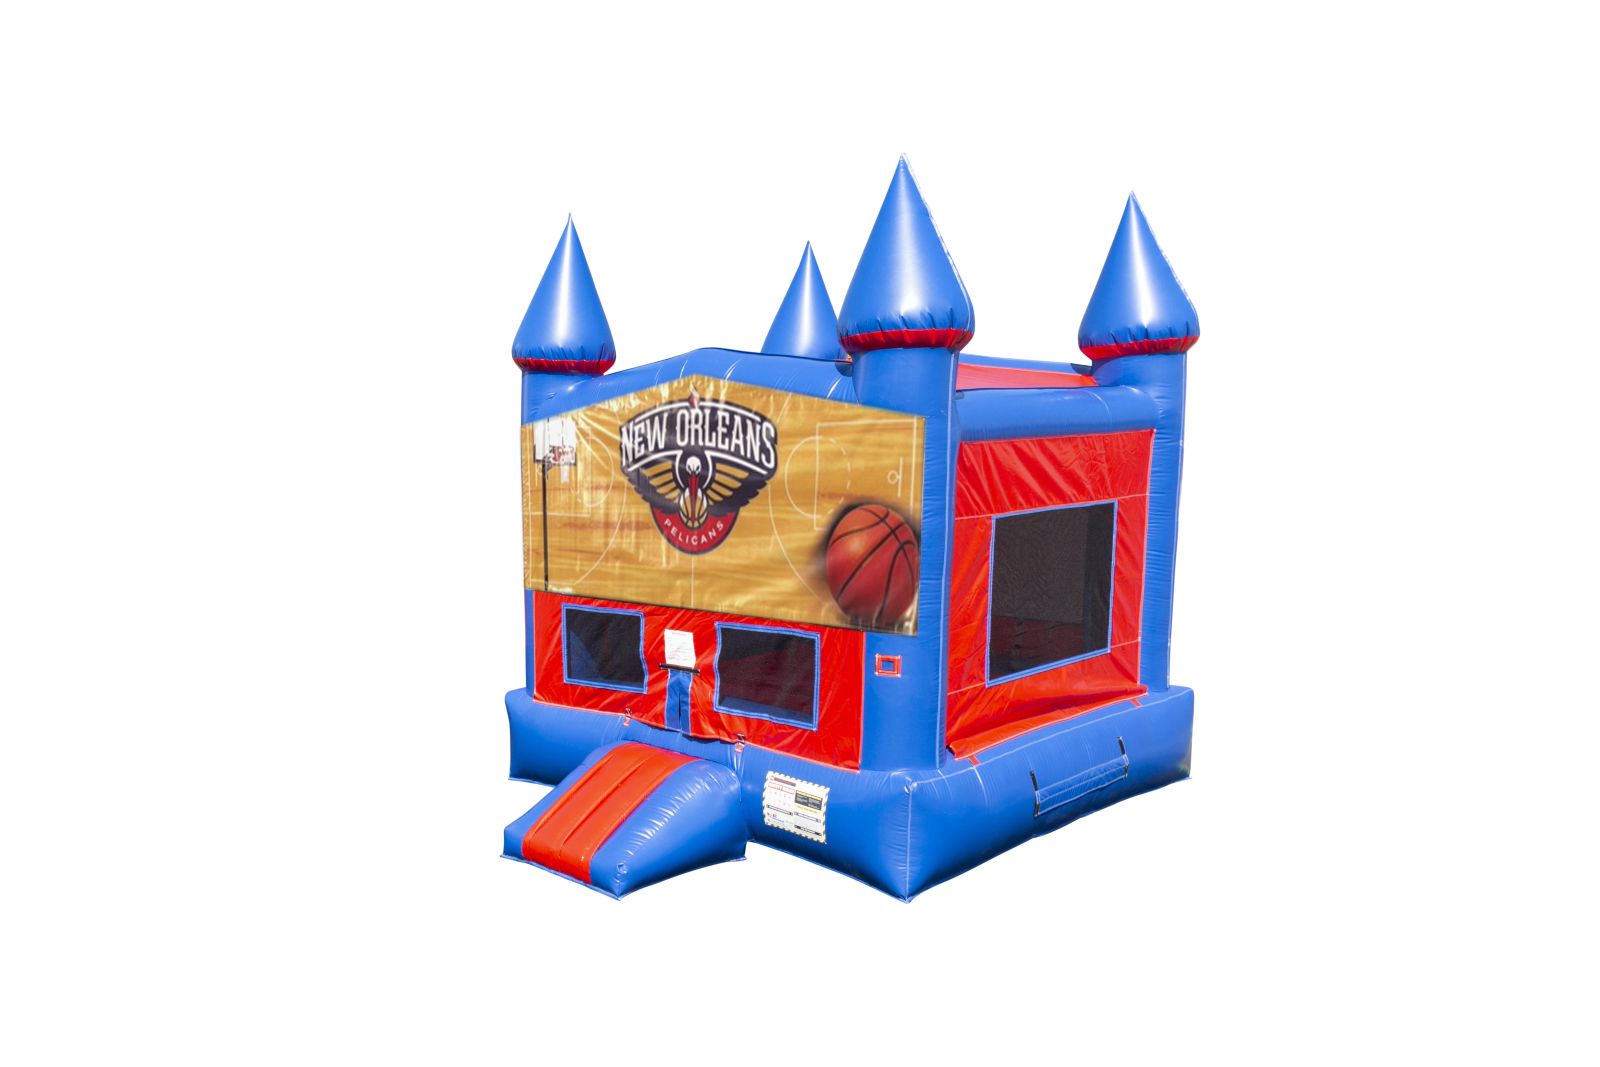 Themed Red and Blue Bounce House front and side